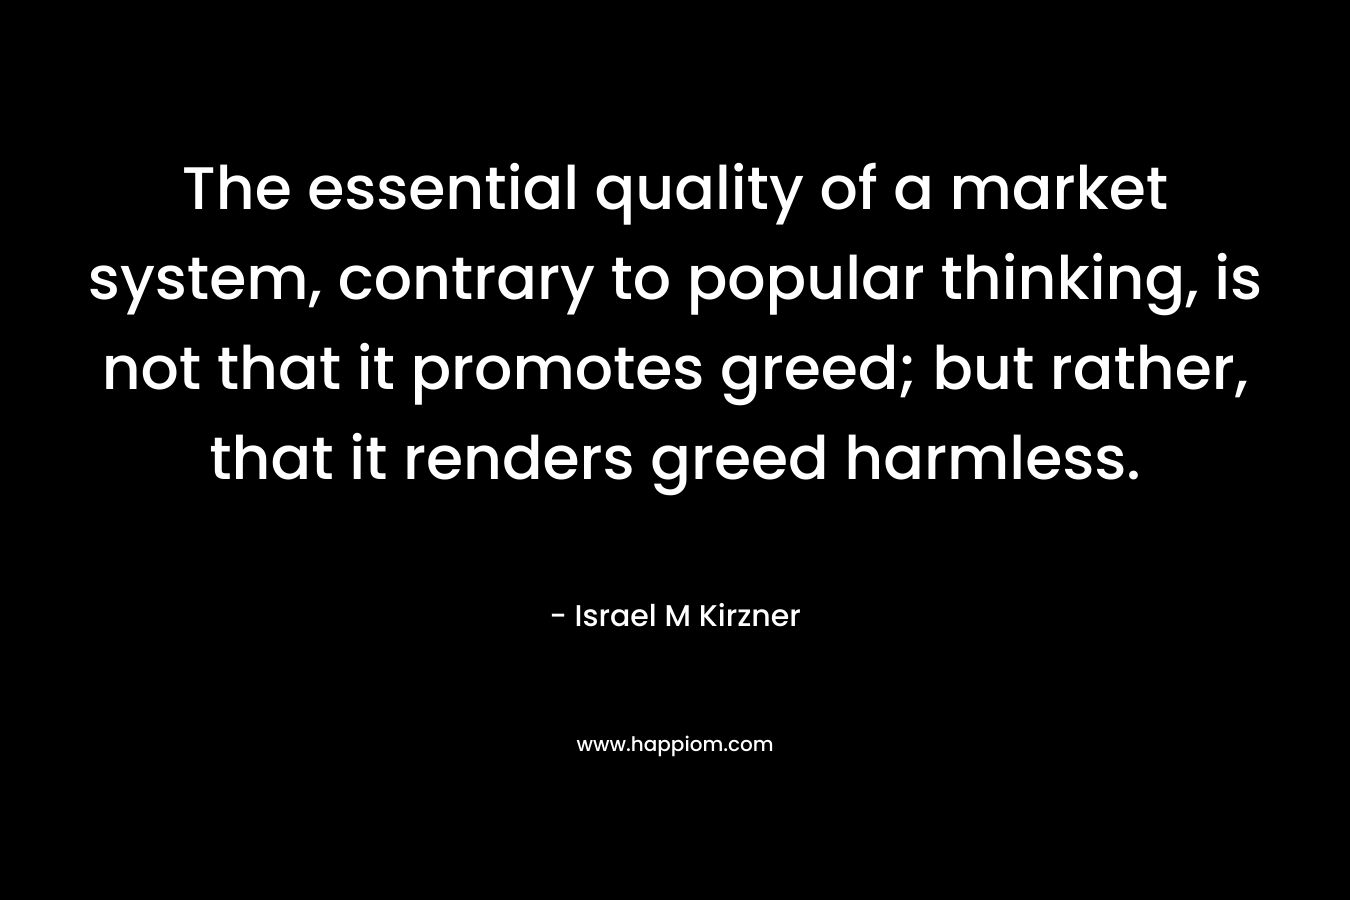 The essential quality of a market system, contrary to popular thinking, is not that it promotes greed; but rather, that it renders greed harmless.